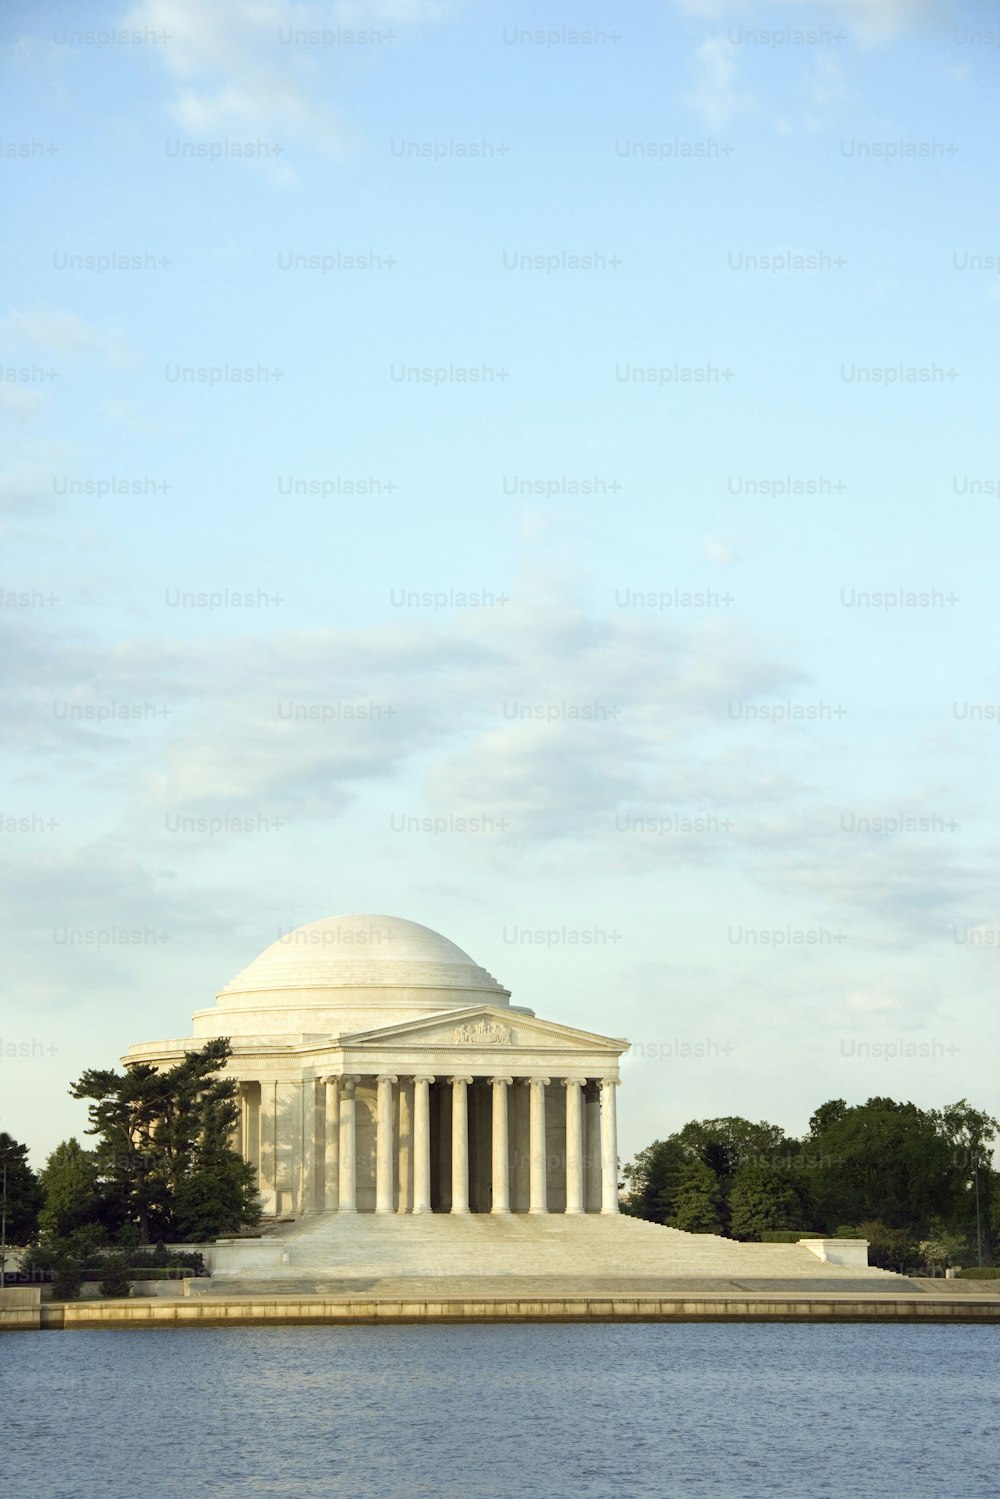 a view of the jefferson memorial from across the water